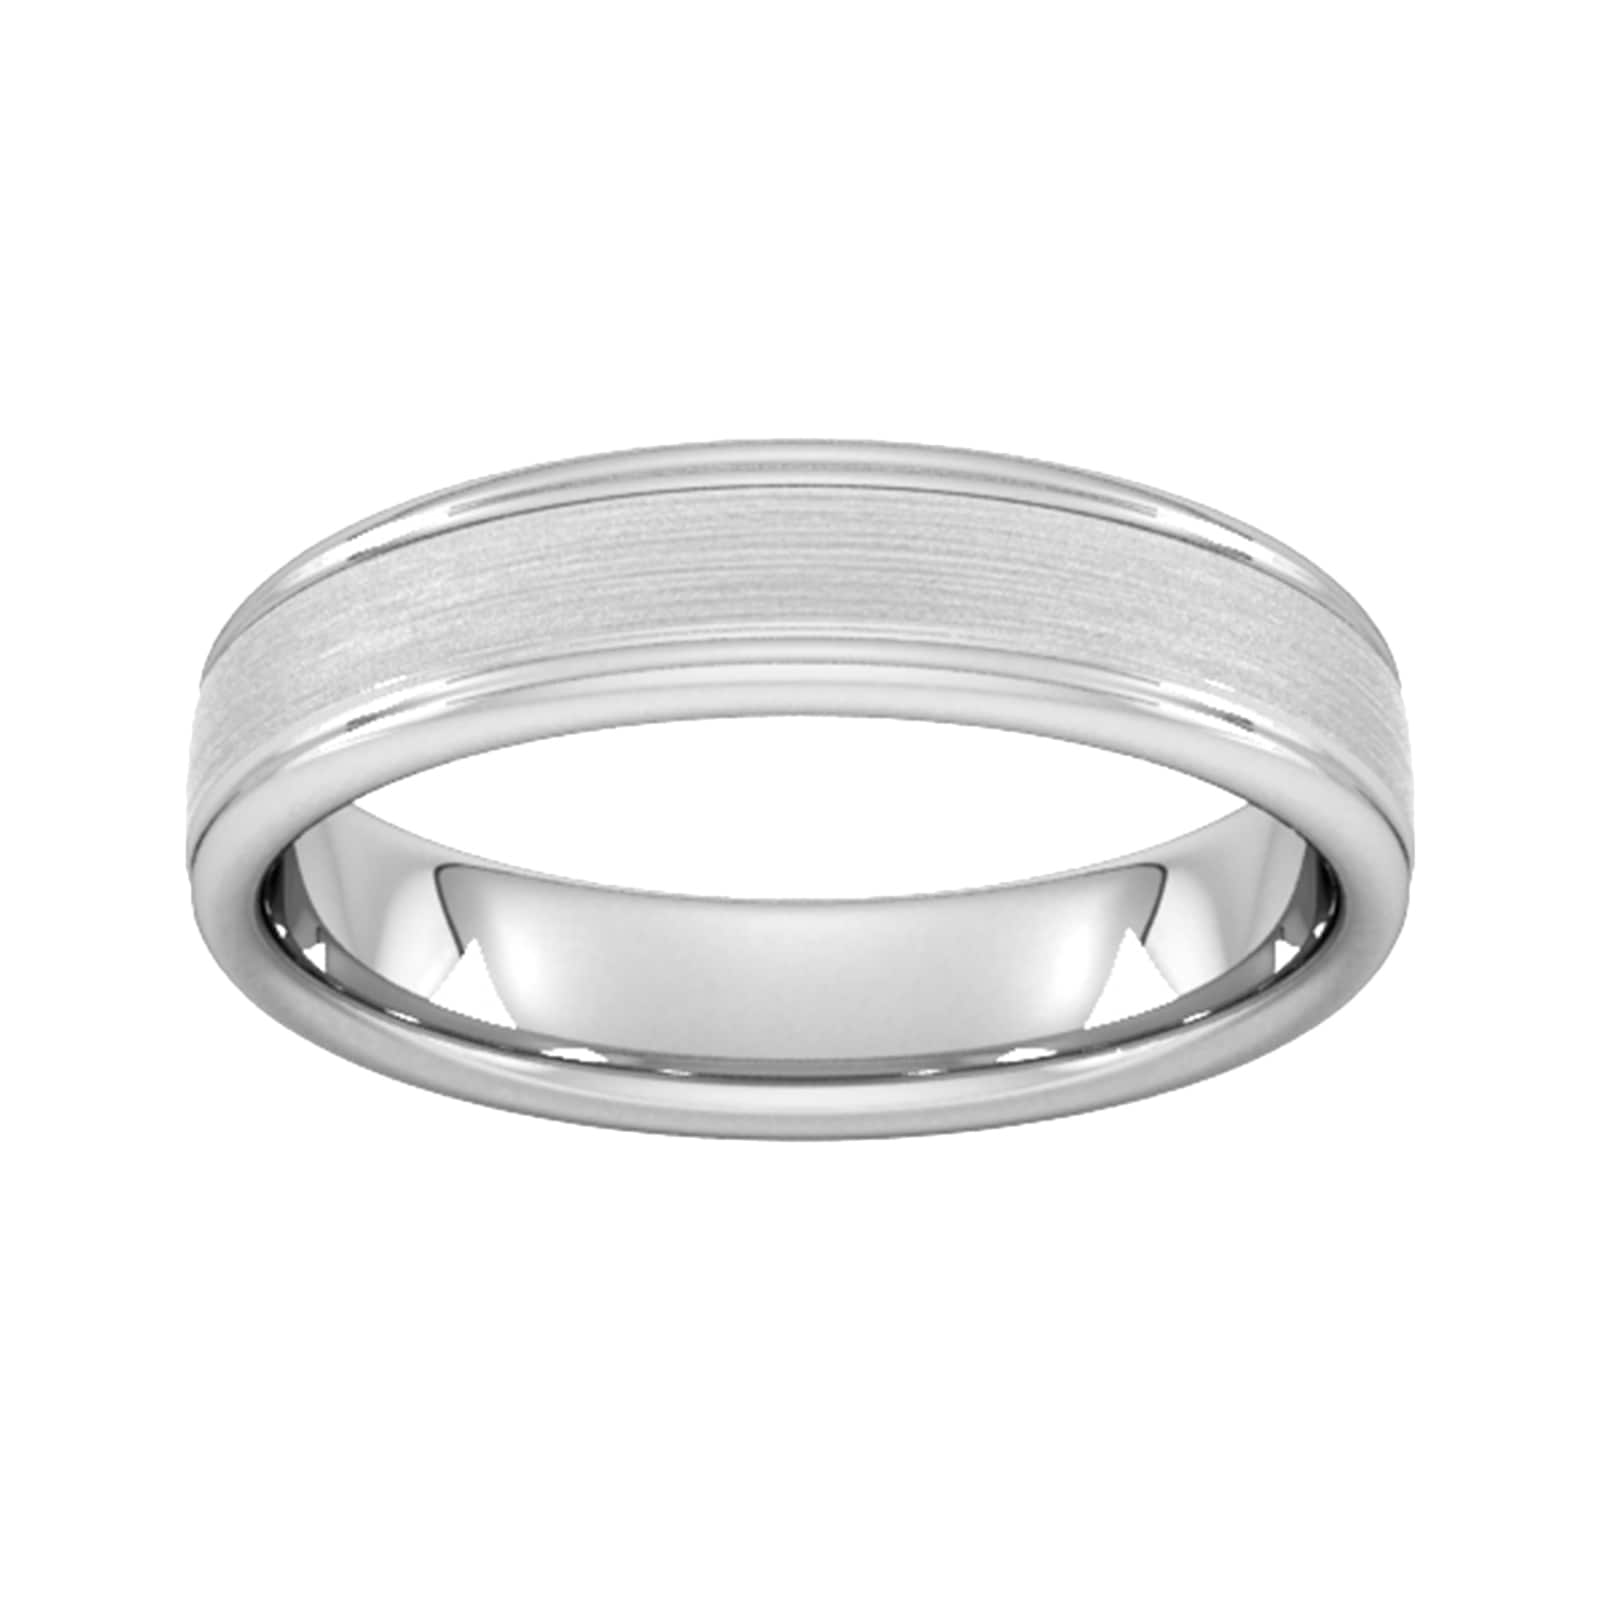 5mm Flat Court Heavy Matt Centre With Grooves Wedding Ring In 950 Palladium - Ring Size R